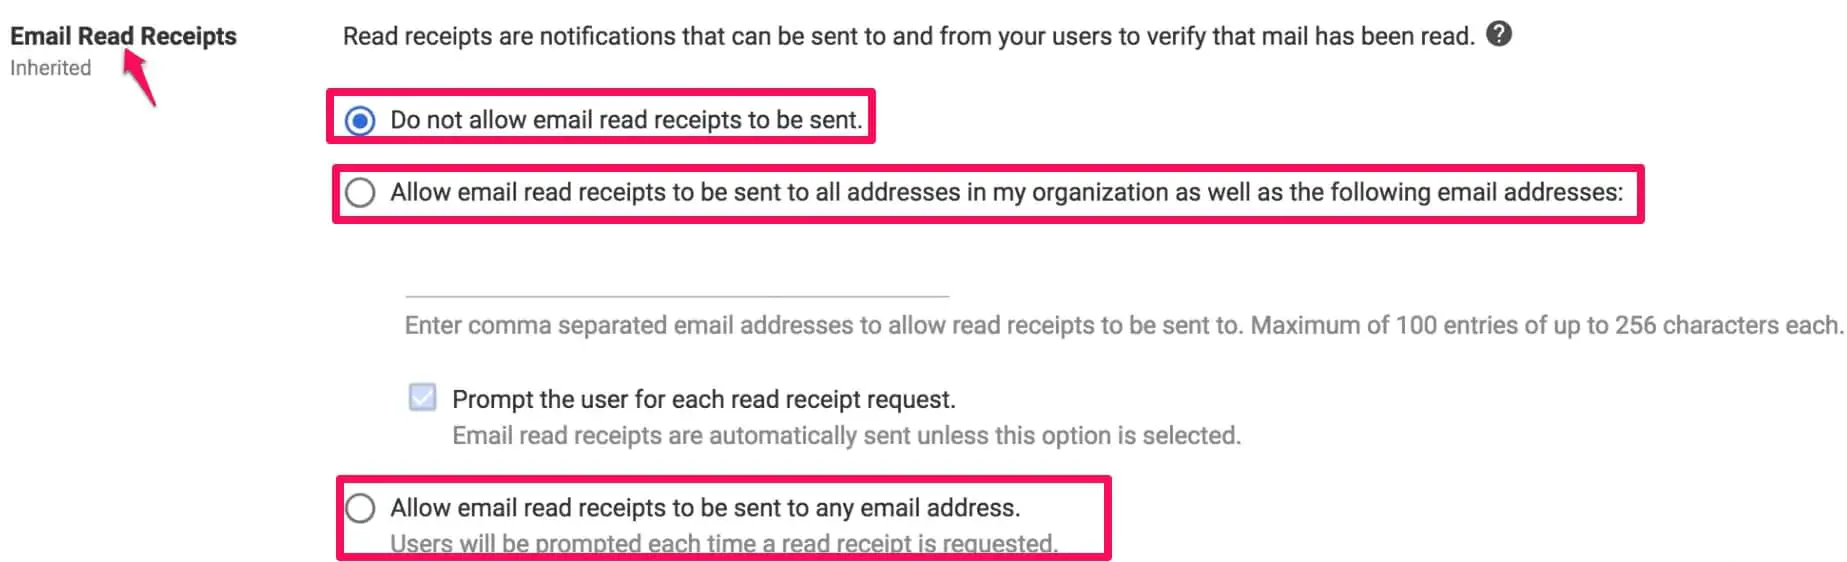 How To Enable The Gmail Read Receipt Feature